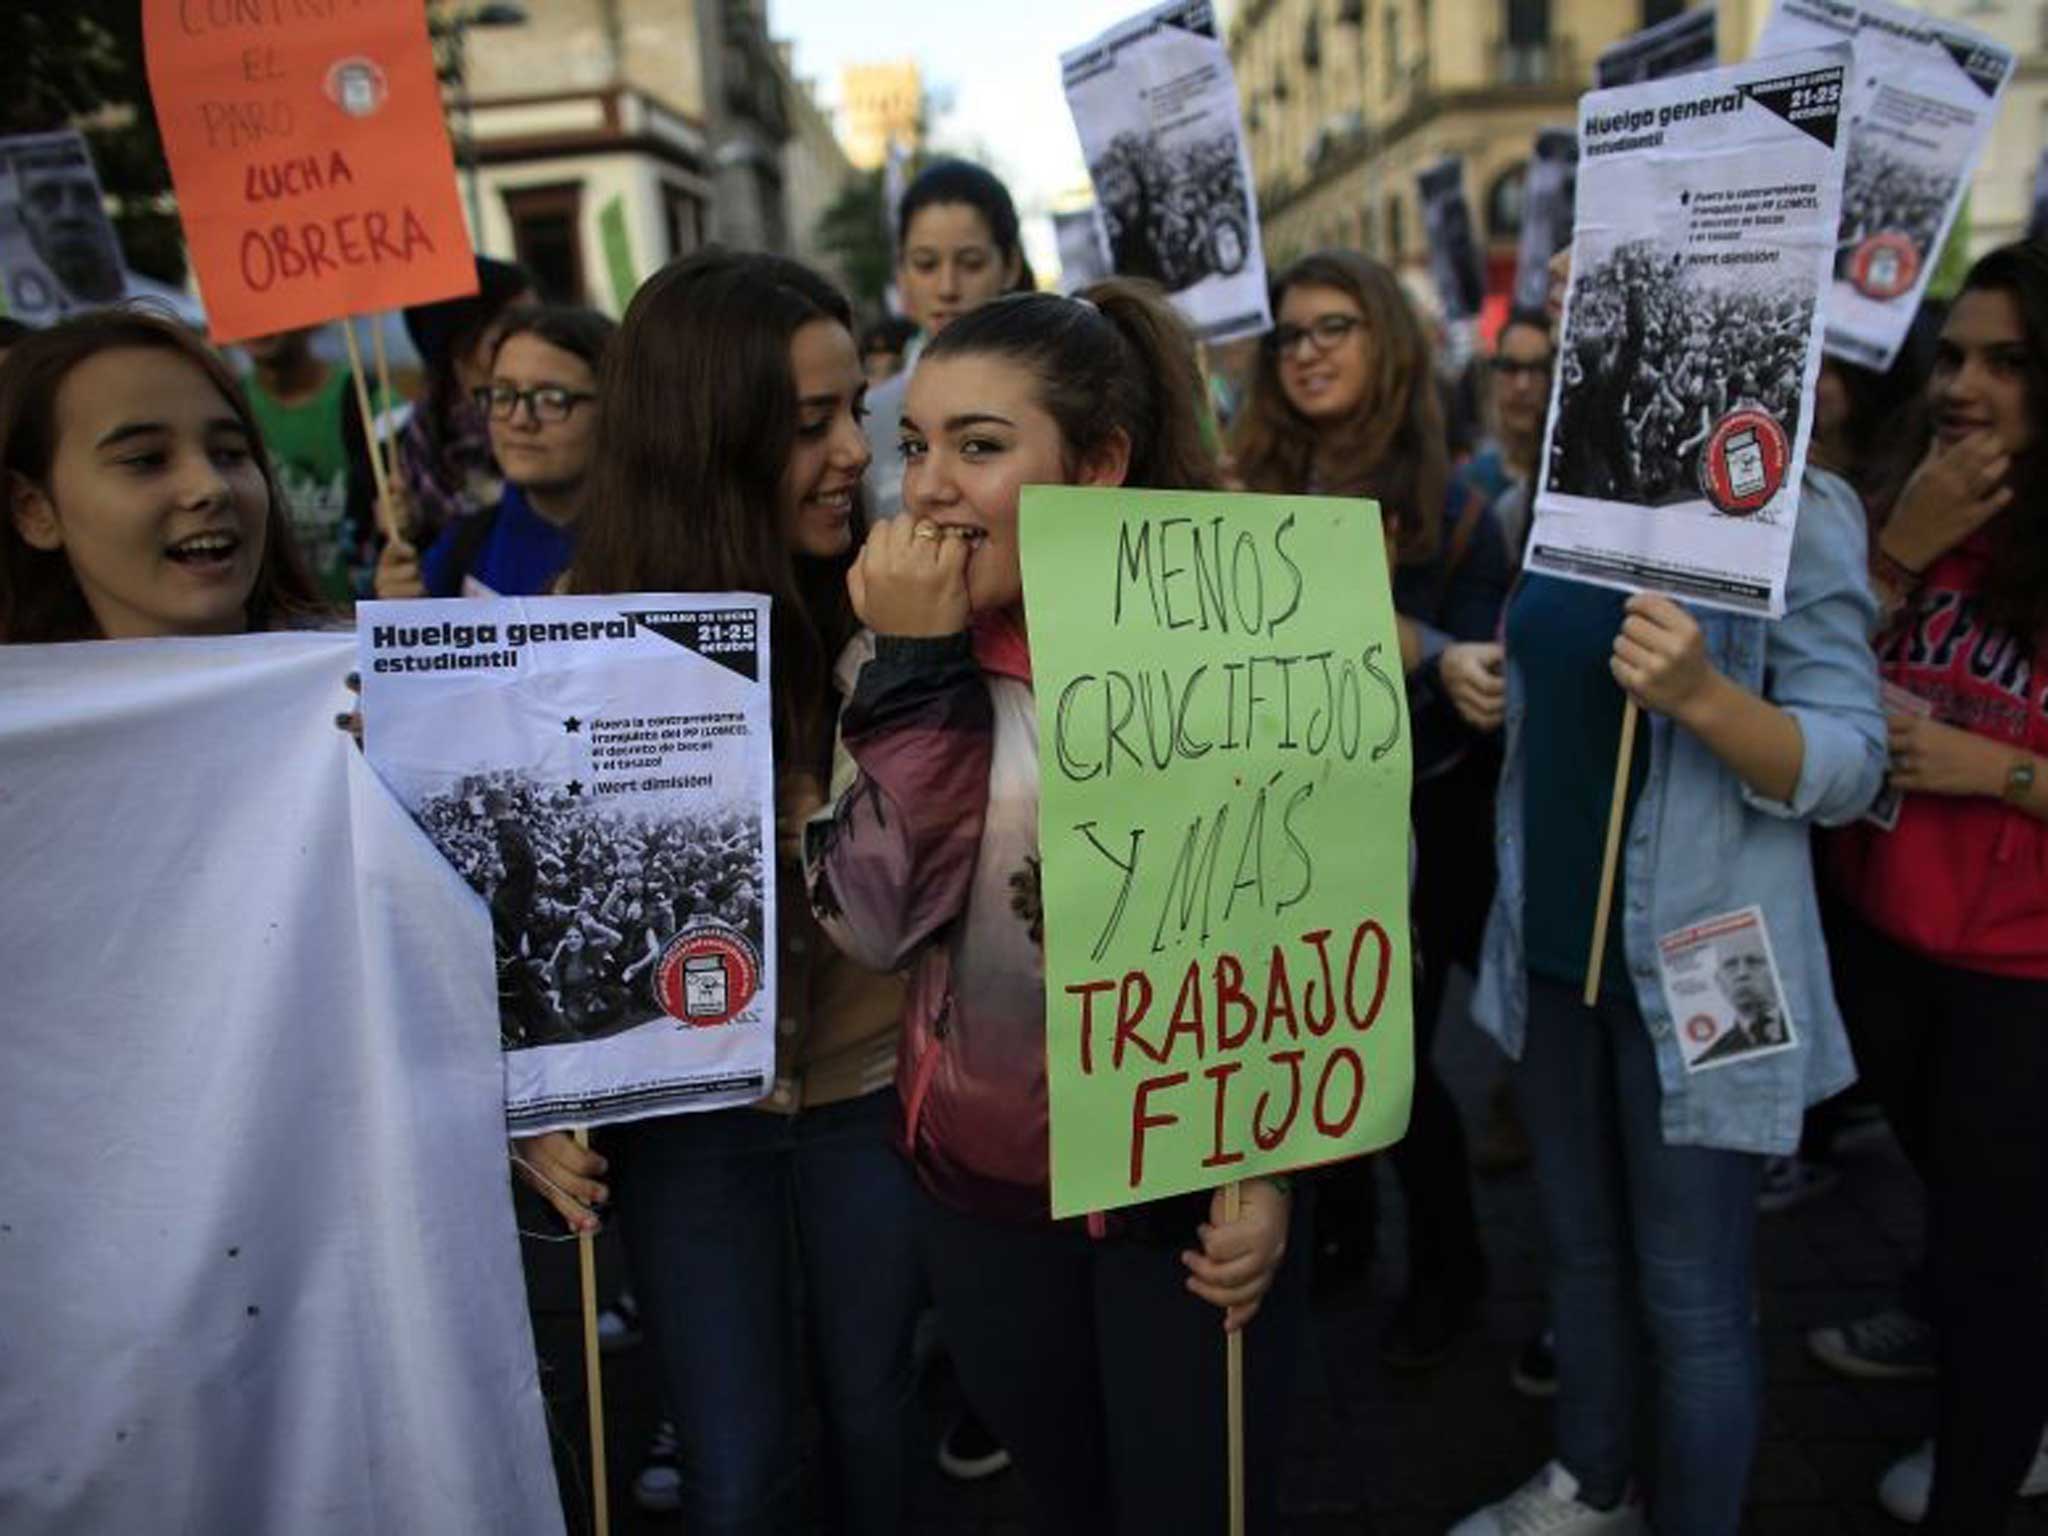 Spanish students hold signs in Seville saying: 'less crucifixes, more jobs' today